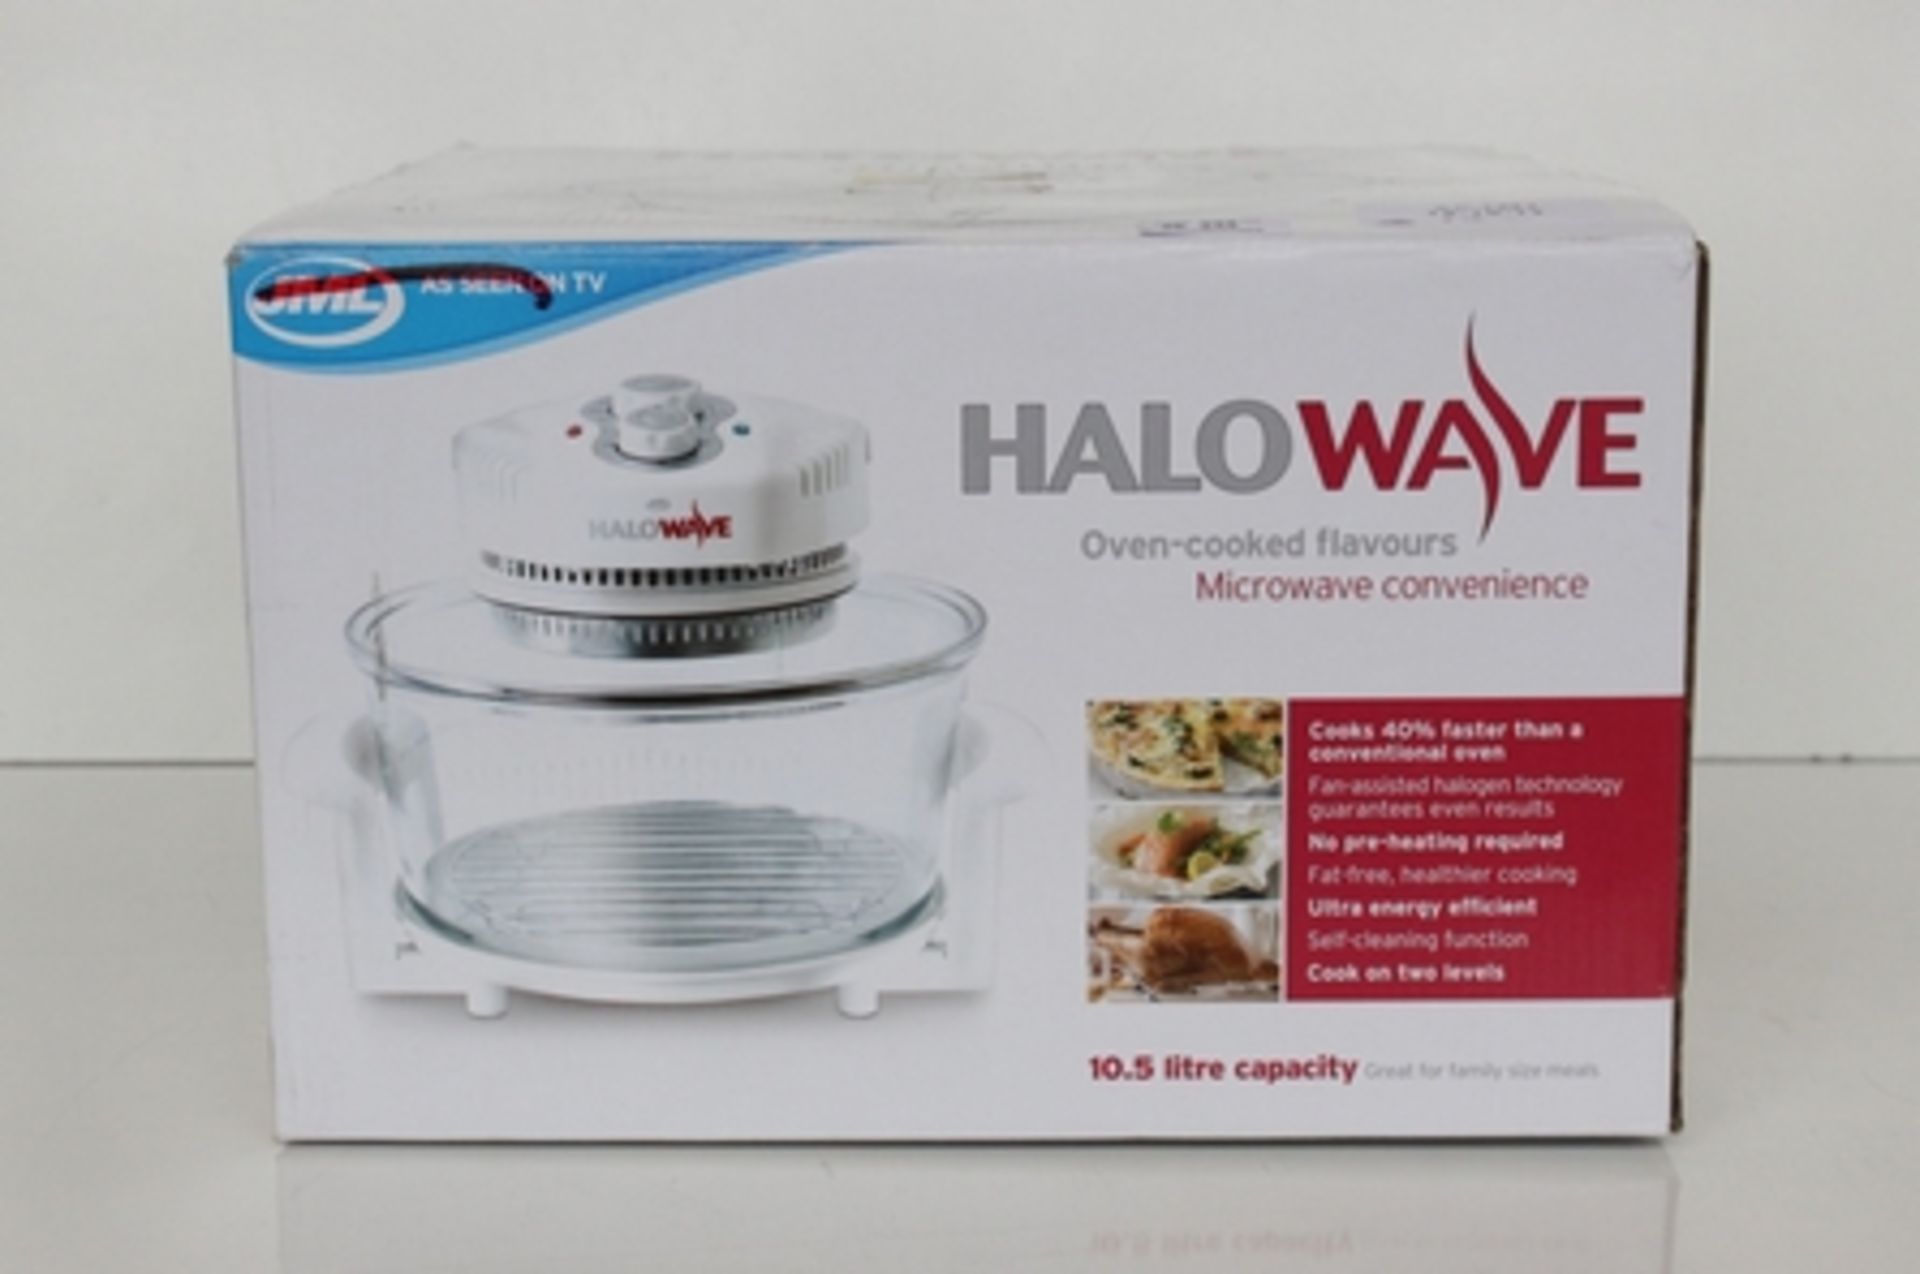 1 LOT TO CONTAIN 2 BOXED HALOWAVE HALOGEN OVENS (AC-LMJ)